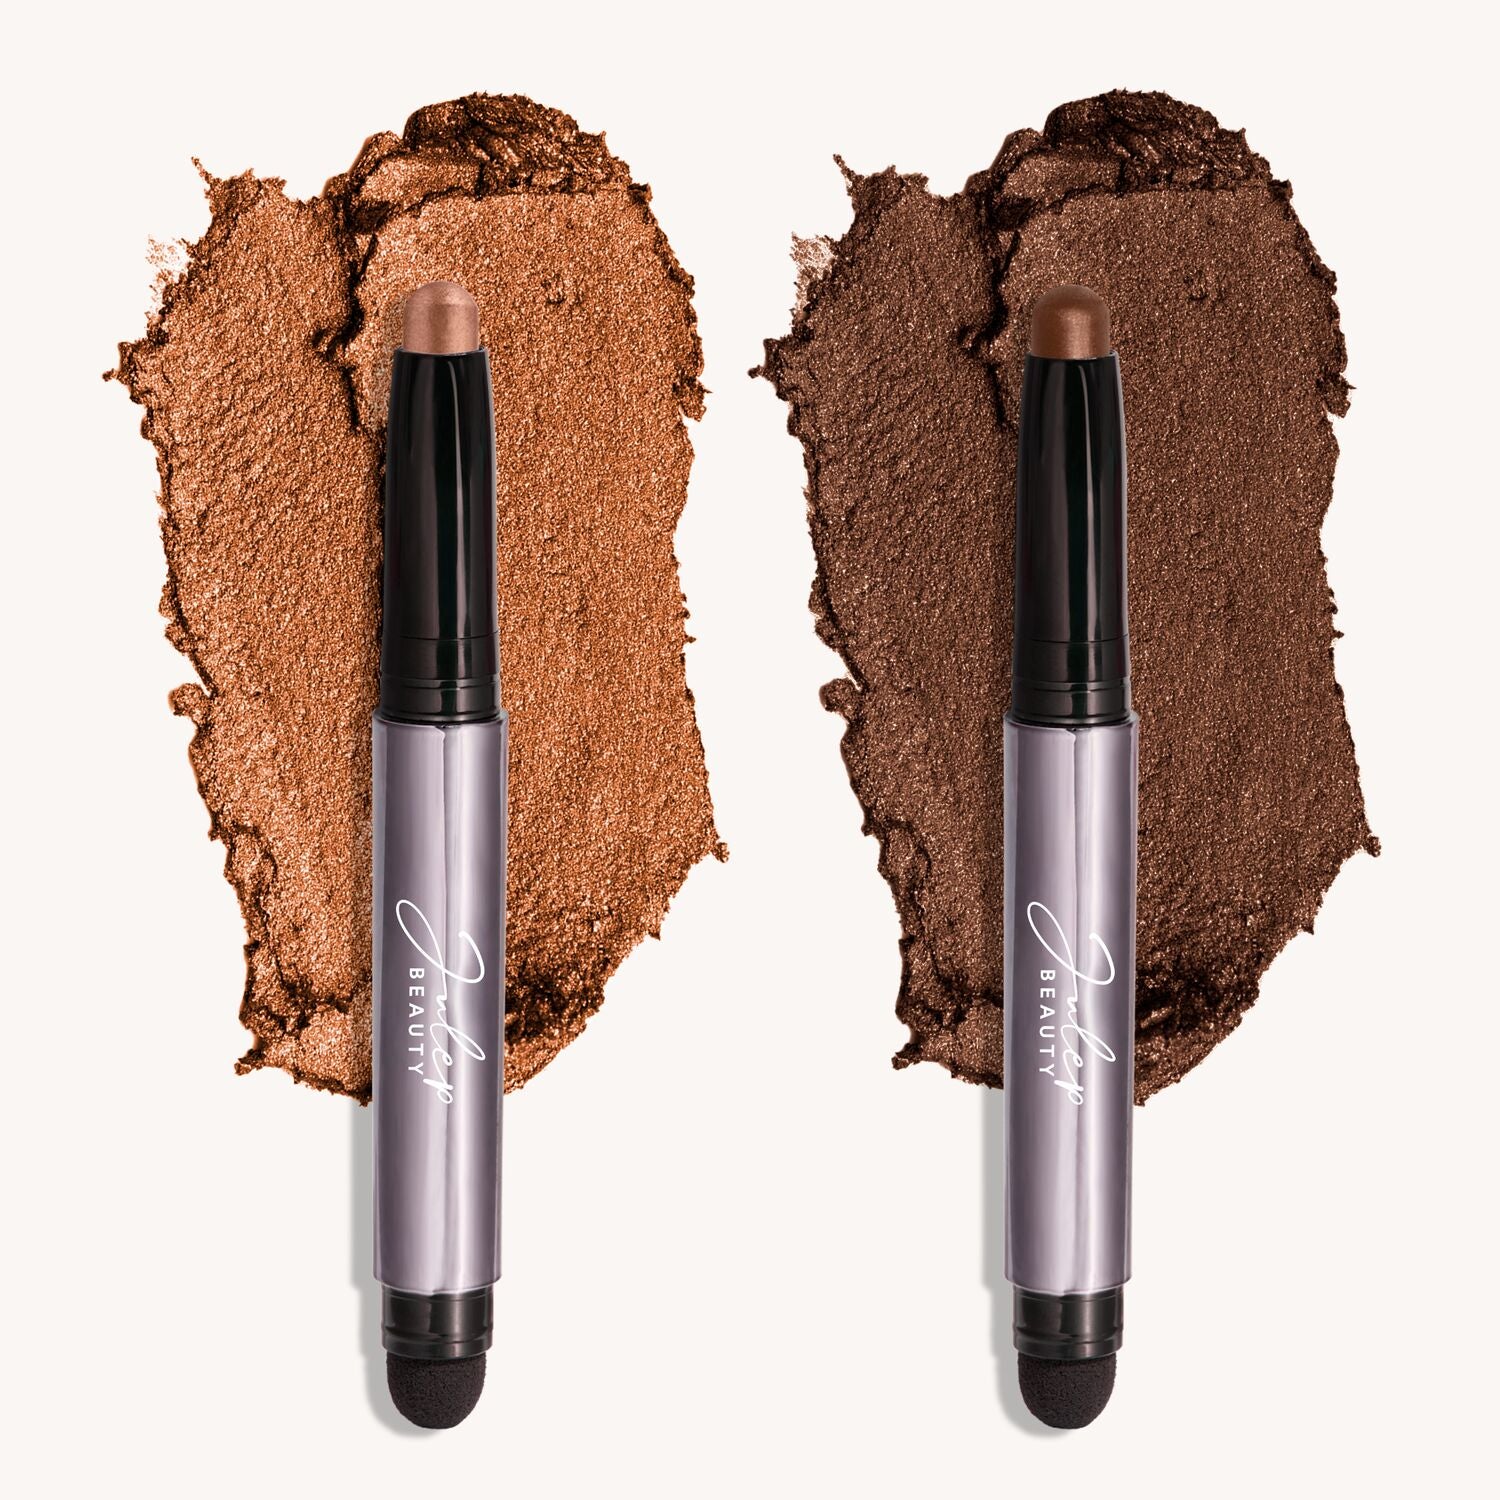 Julep Eyeshadow 101 Crème-to-Powder Eyeshadow Stick Duo, Copper Shimmer & Cocoa Shimmer